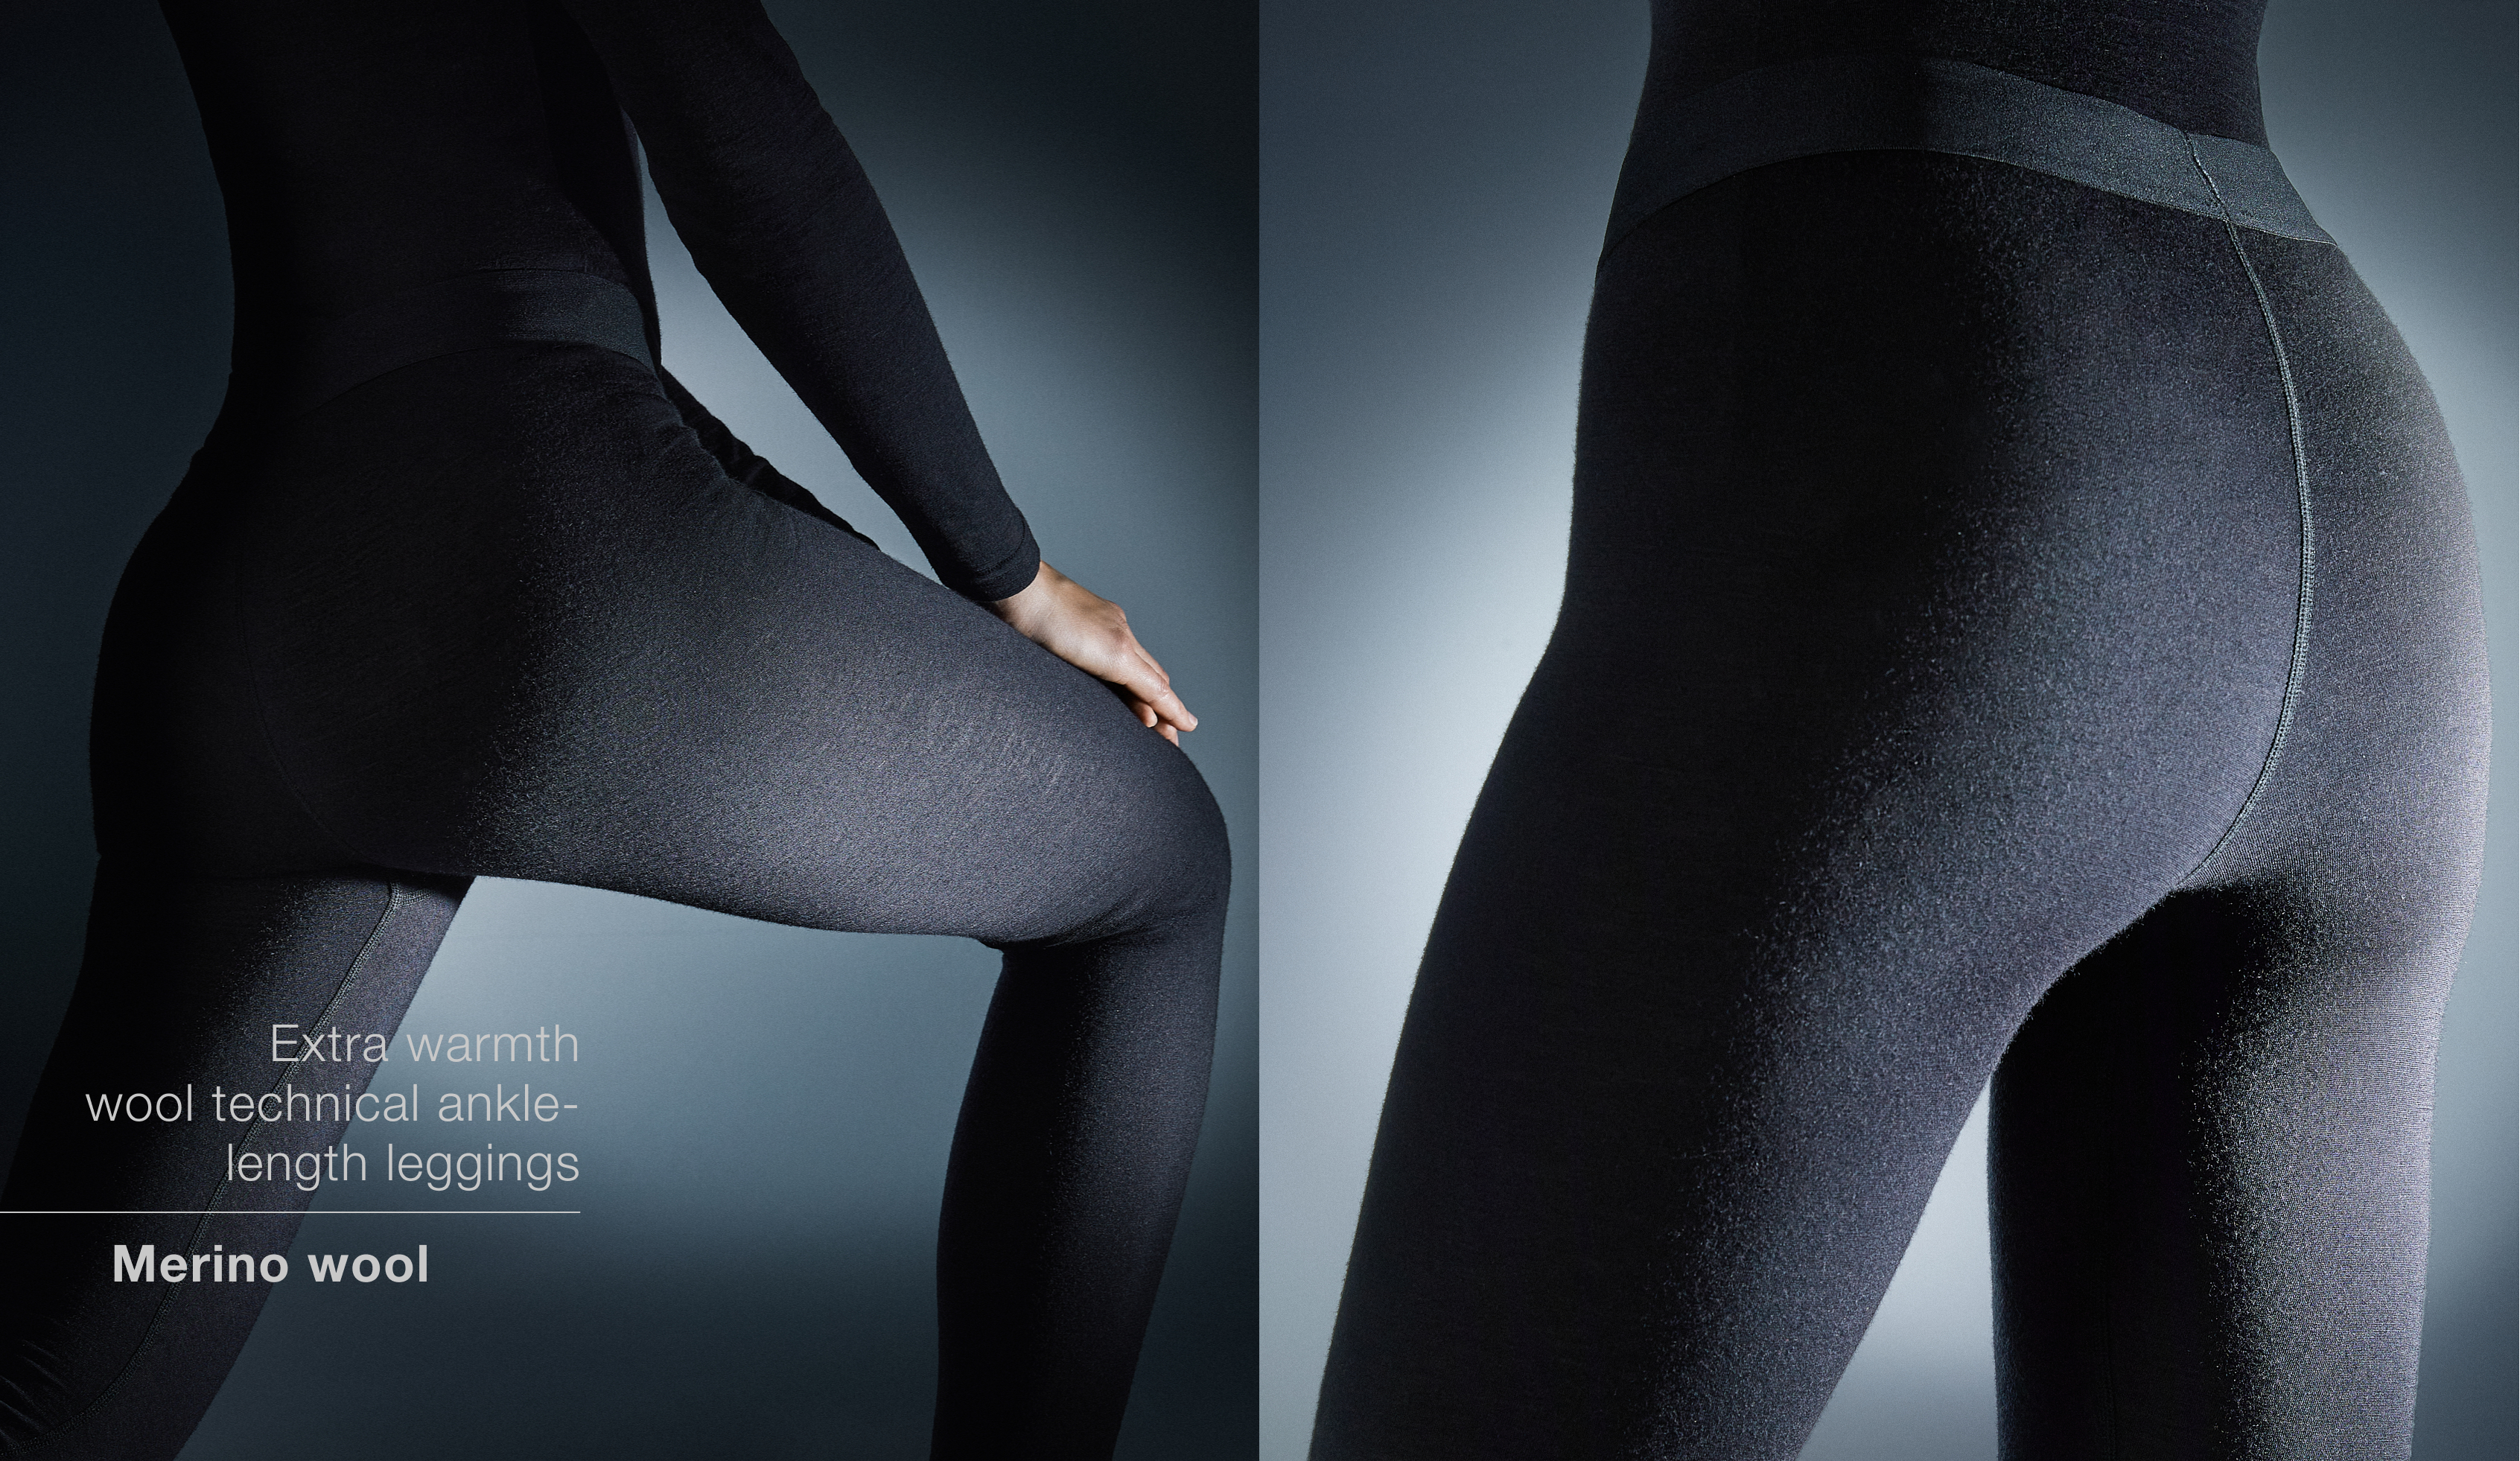 Extra warmth wool technical ankle-length leggings